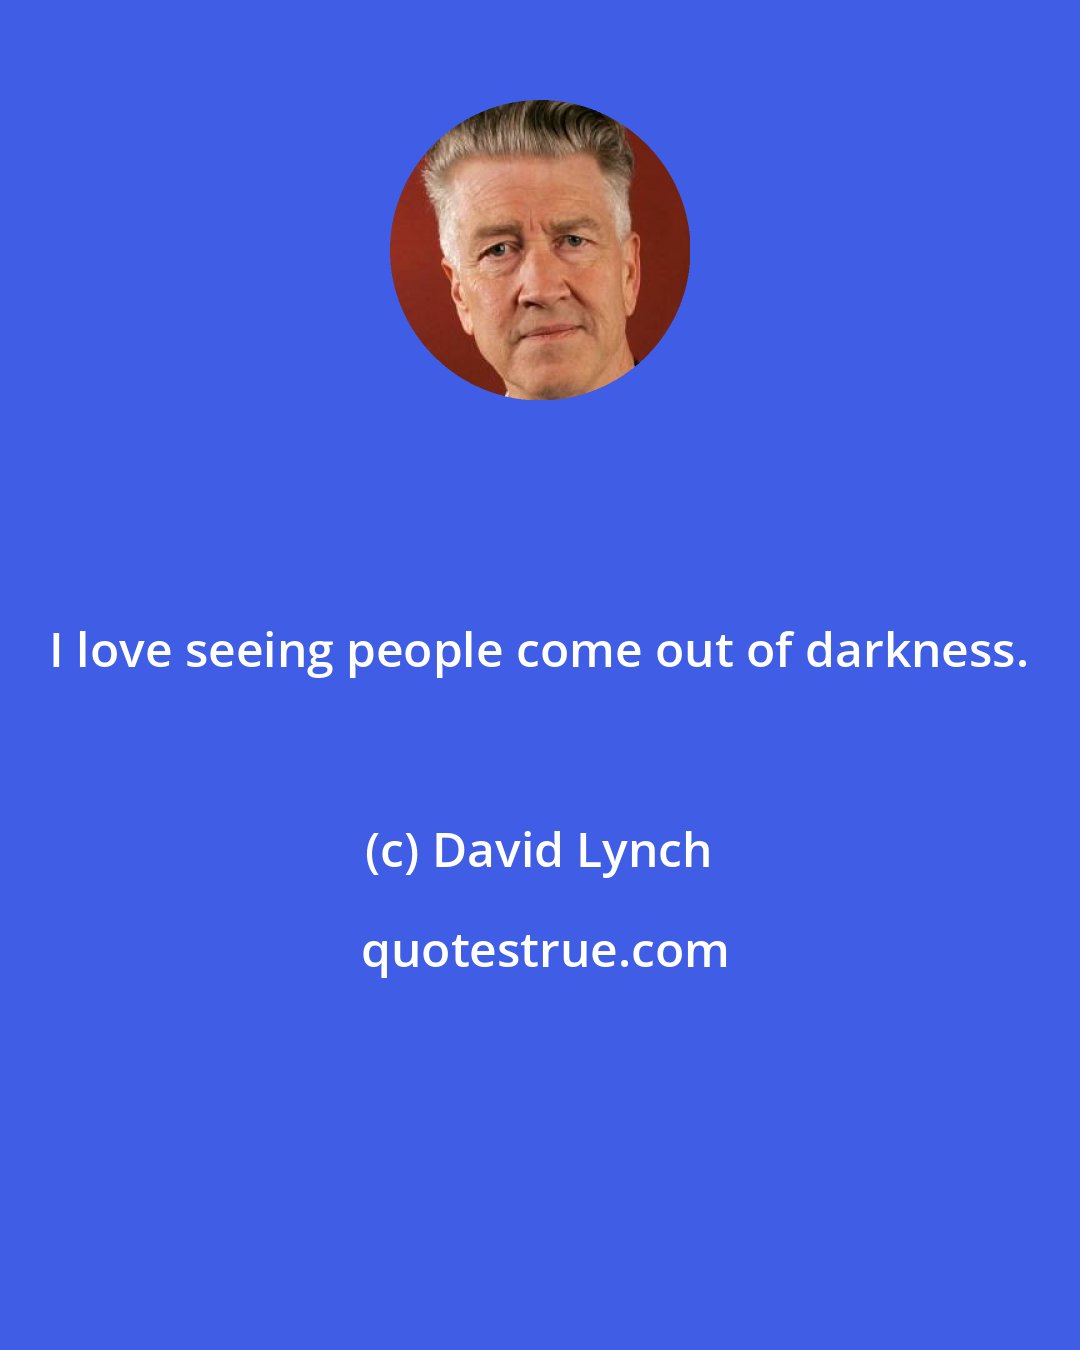 David Lynch: I love seeing people come out of darkness.